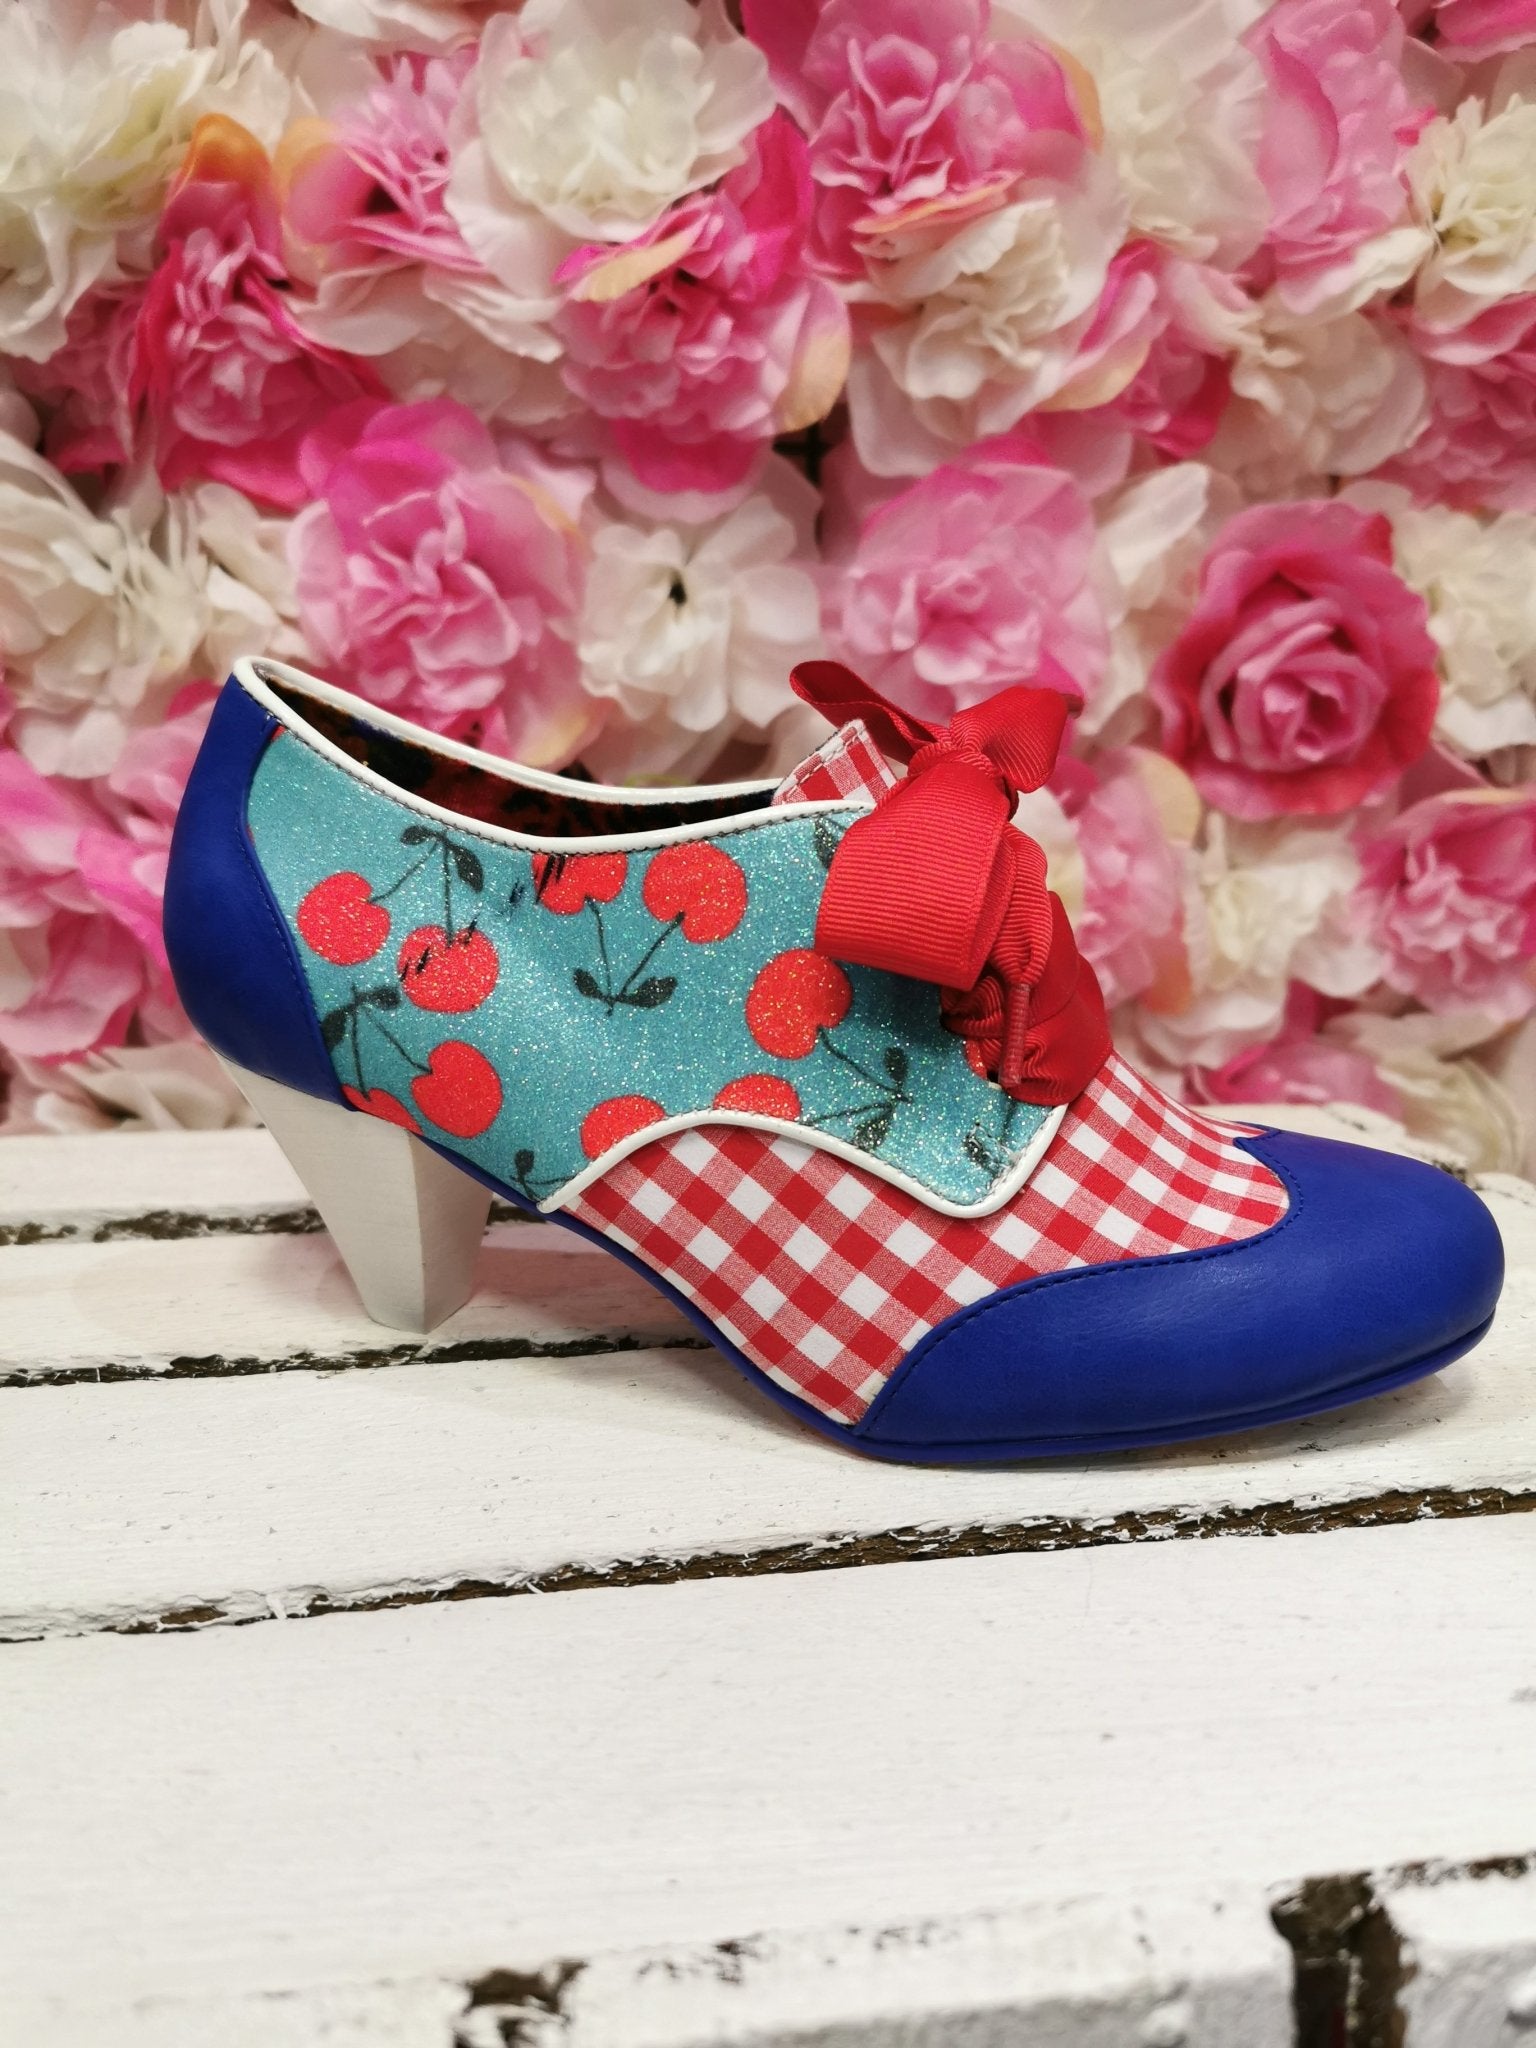 End of Story Blue Check Irregular Choice - Rockamilly-Shoes-Vintage